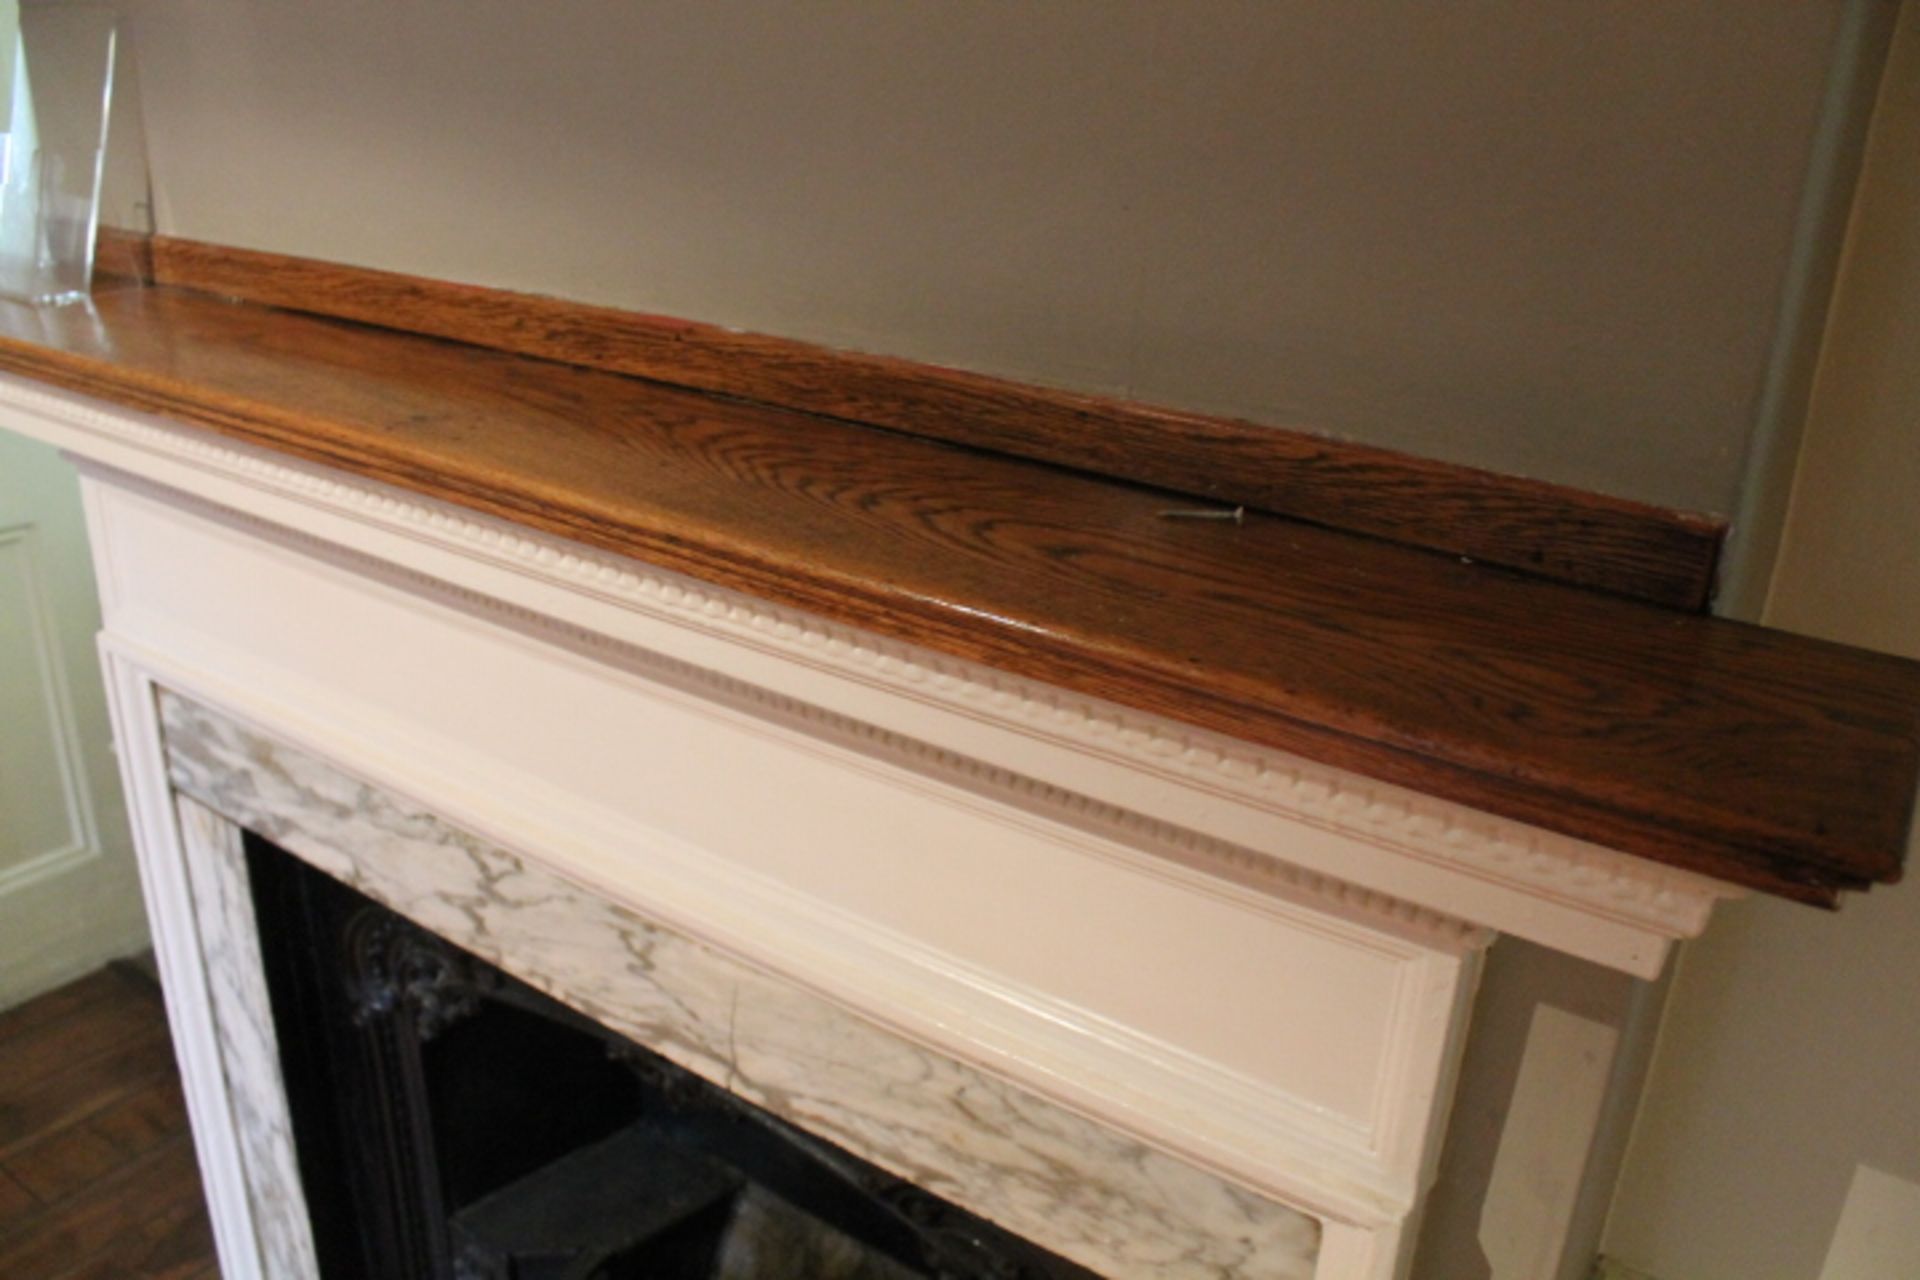 V Front bar - Fireplace (Painted white with cast iron insert) - Image 3 of 4